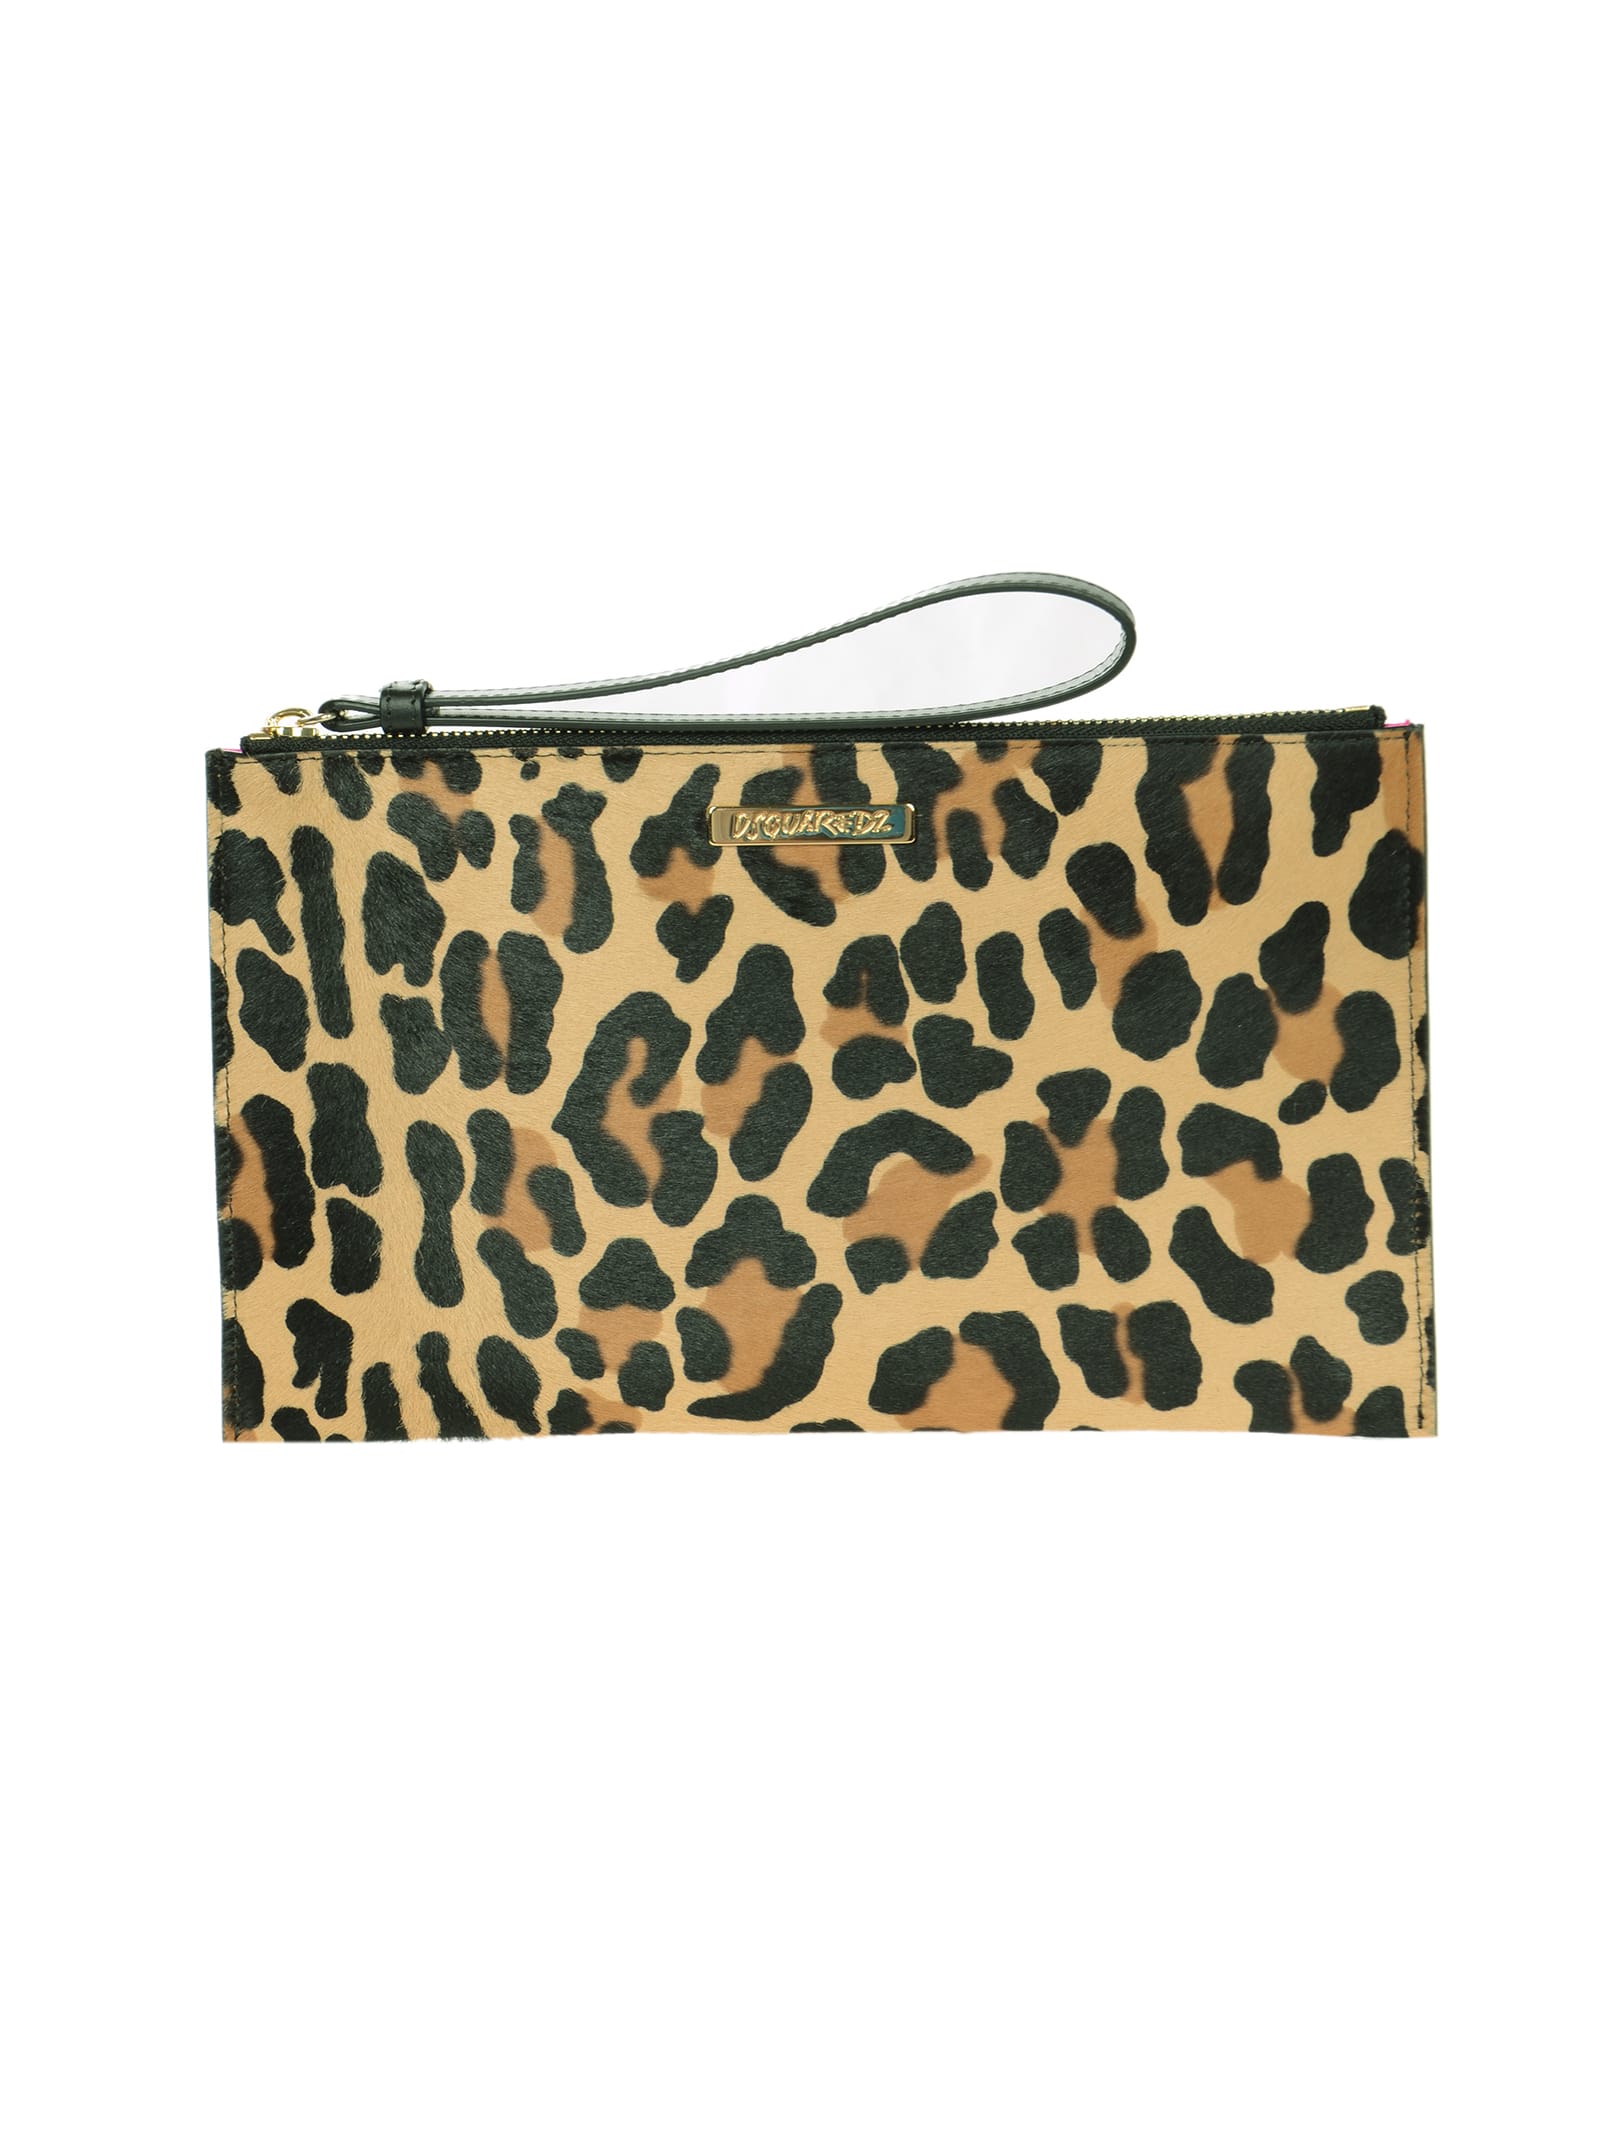 Dsquared2 Leopard Print Pony Leather Clutch